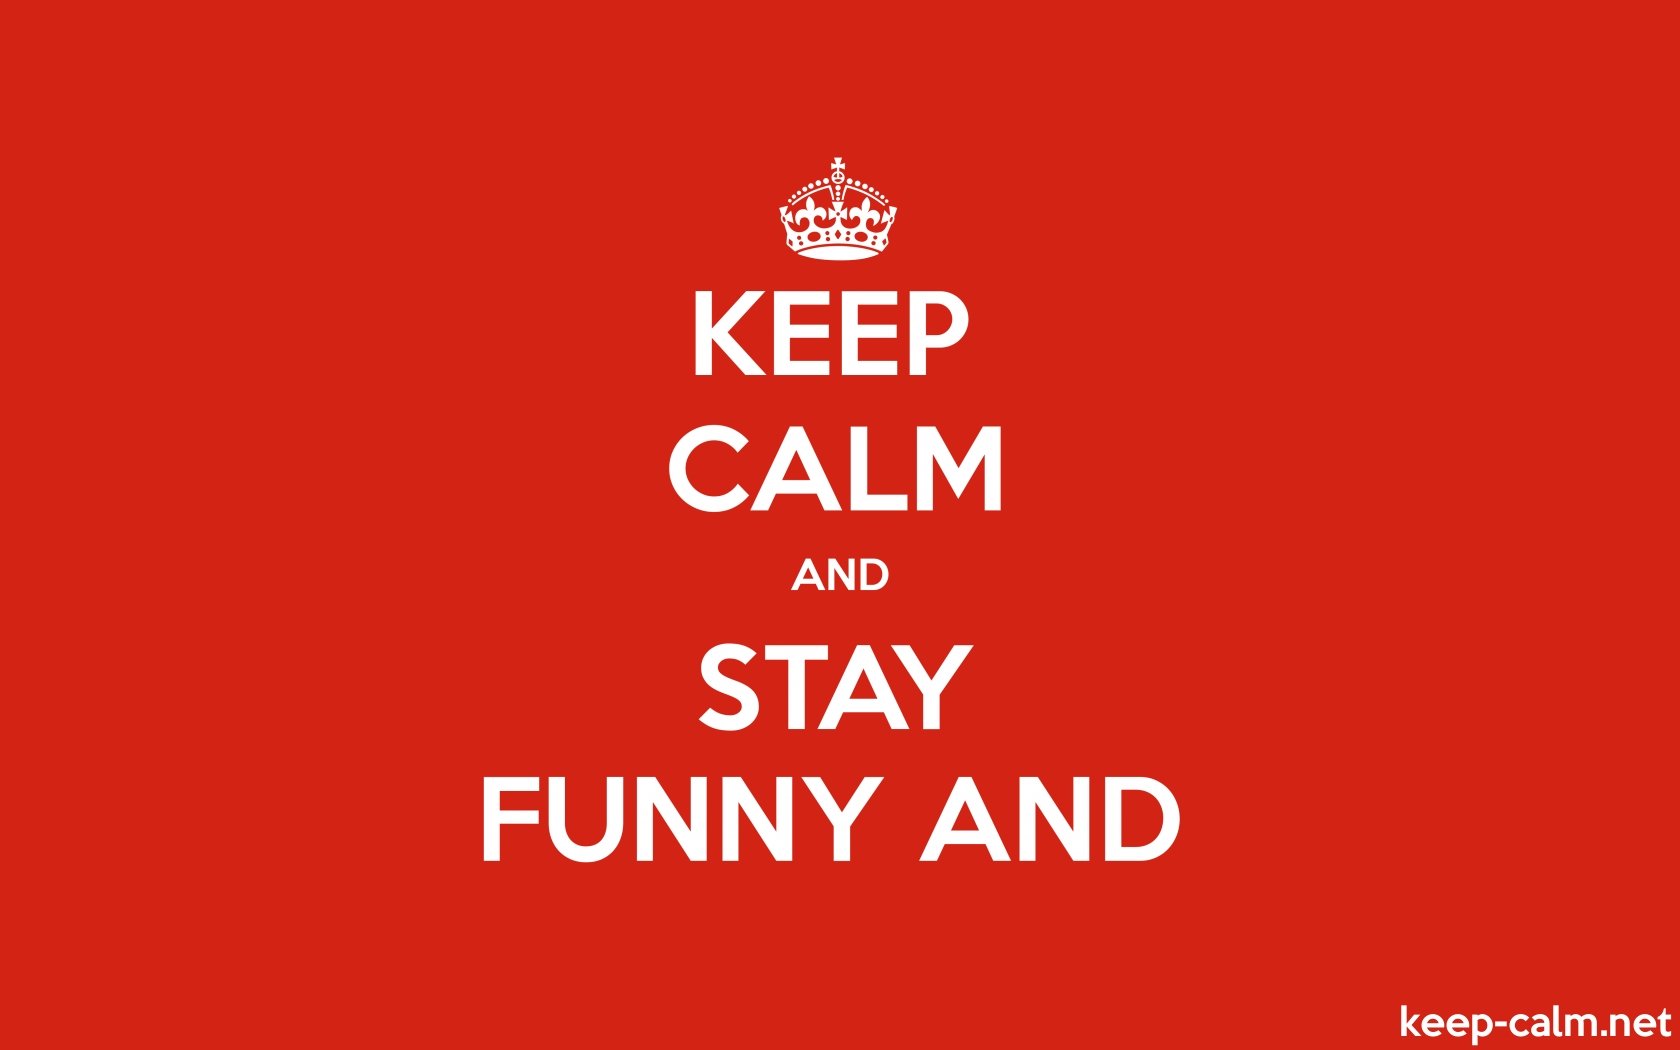 KEEP CALM AND STAY FUNNY AND